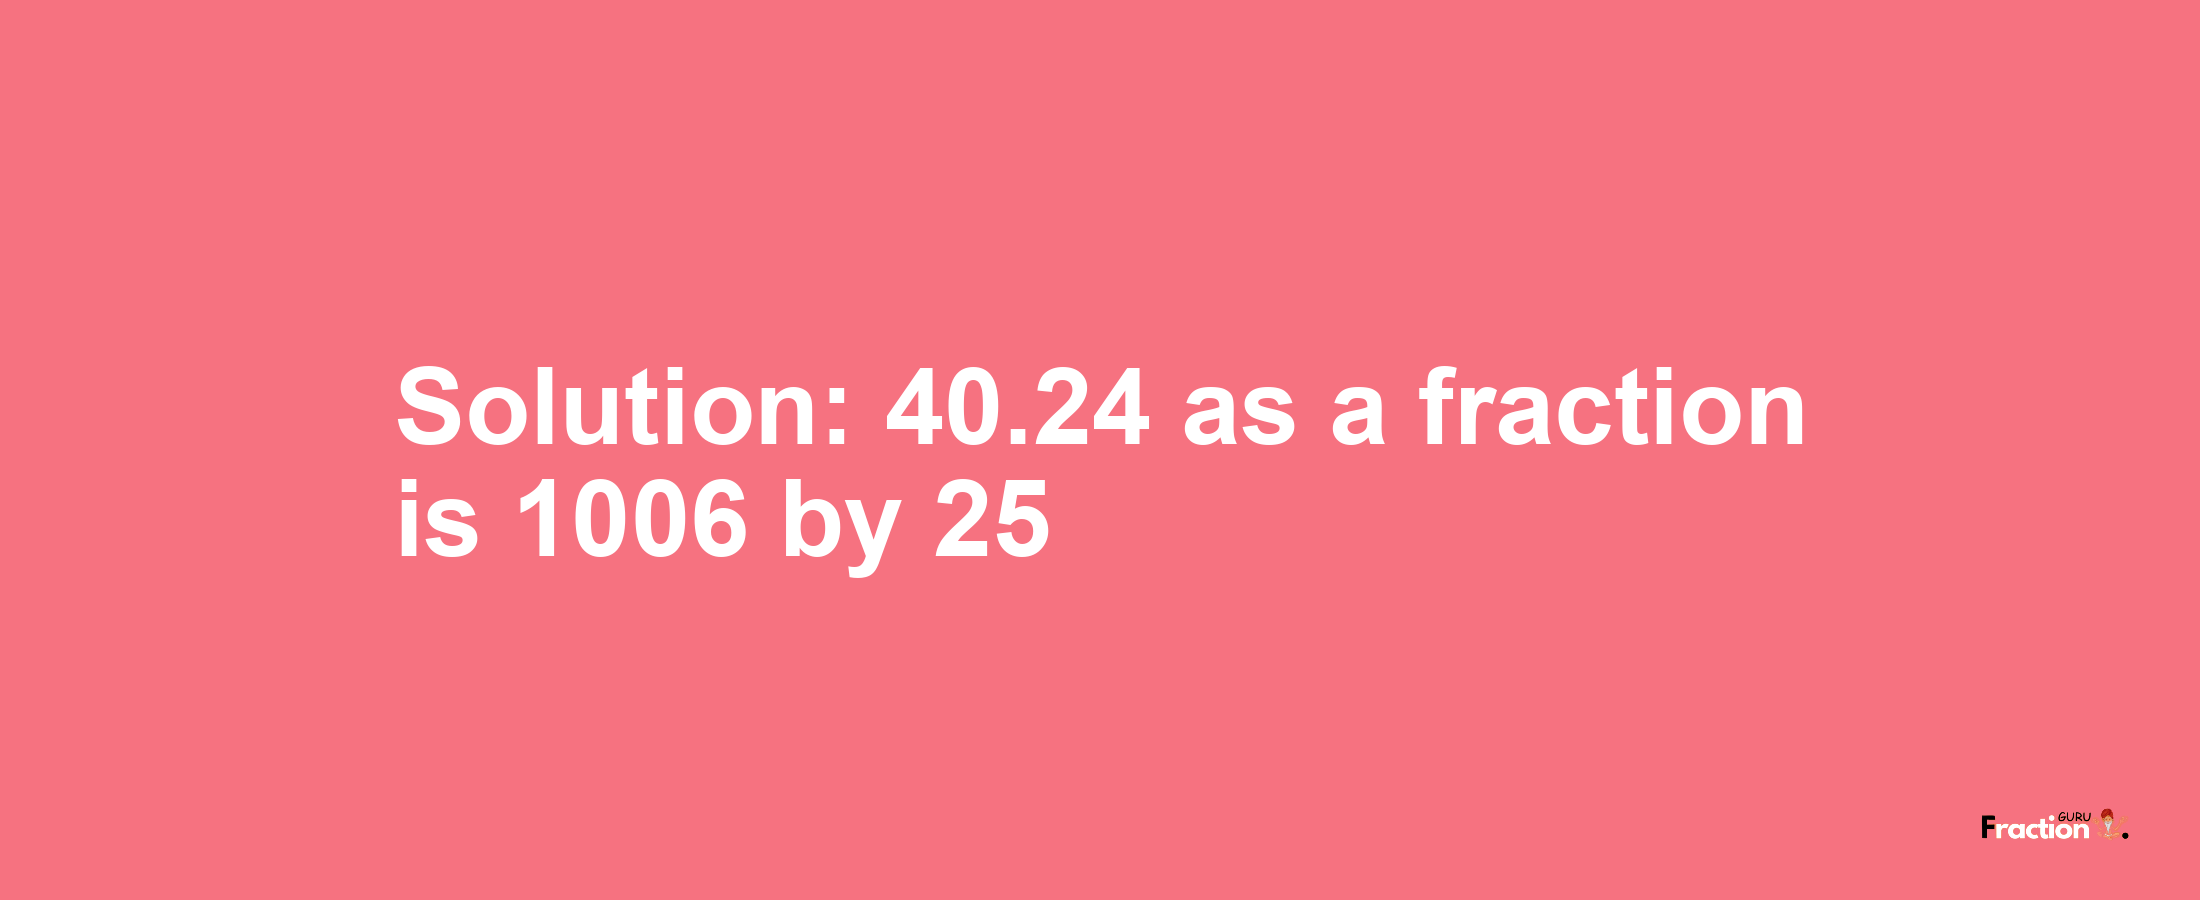 Solution:40.24 as a fraction is 1006/25